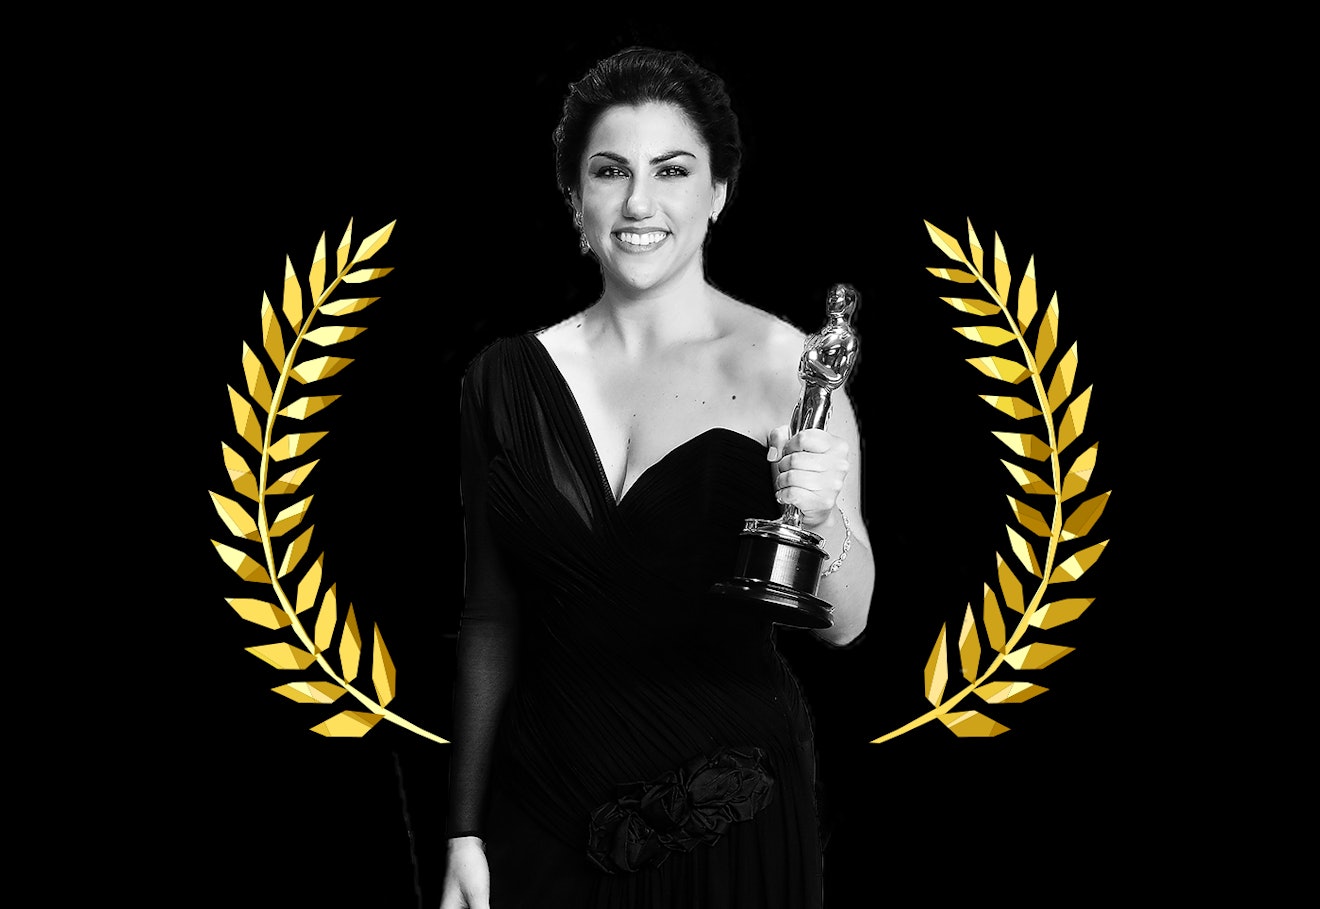 Director Rayka Zehtabchi won the Oscar for Best Documentary Short in 2019 for her film 'Period.' 